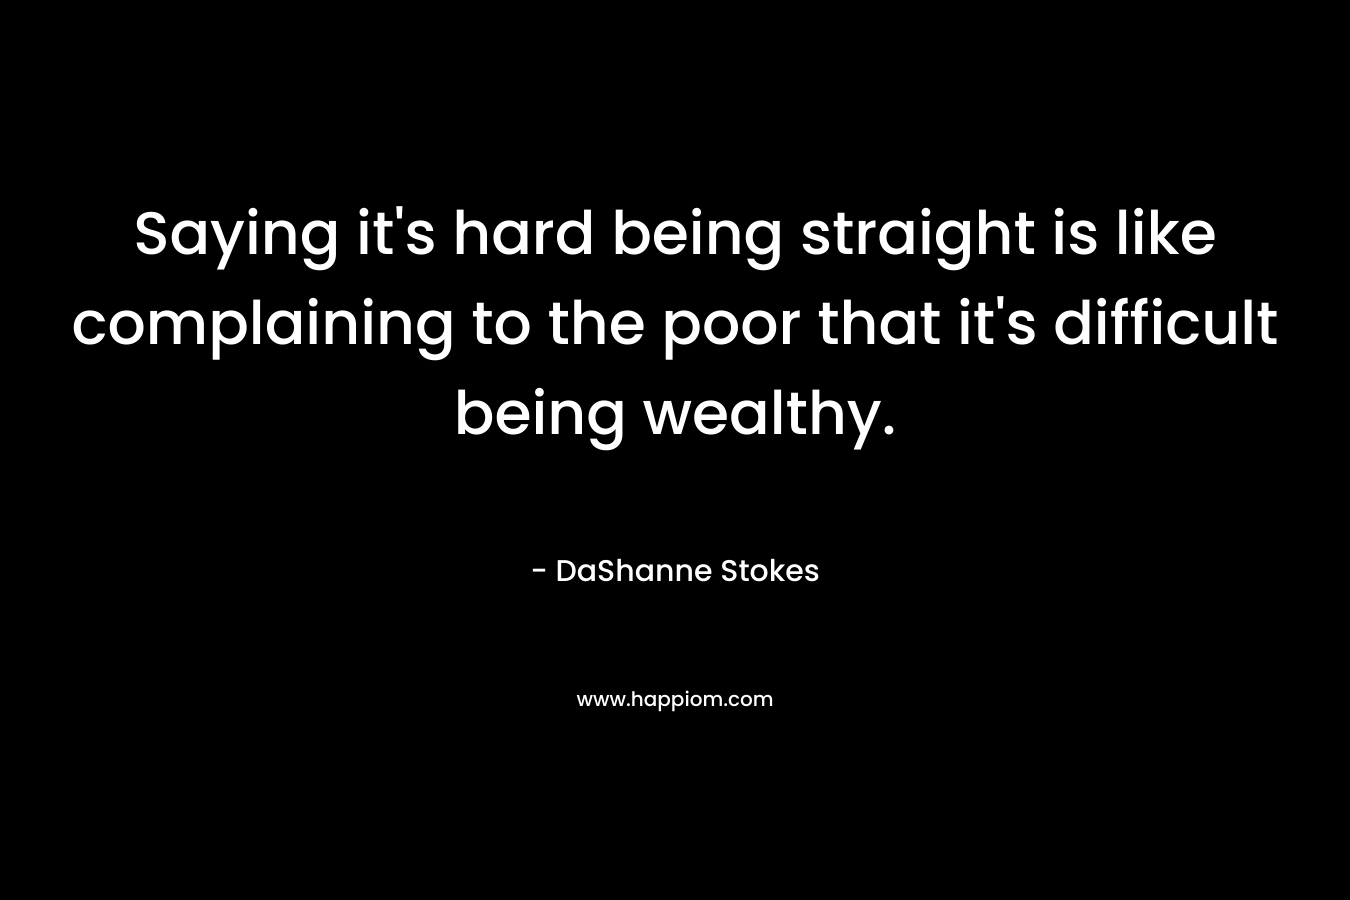 Saying it's hard being straight is like complaining to the poor that it's difficult being wealthy.